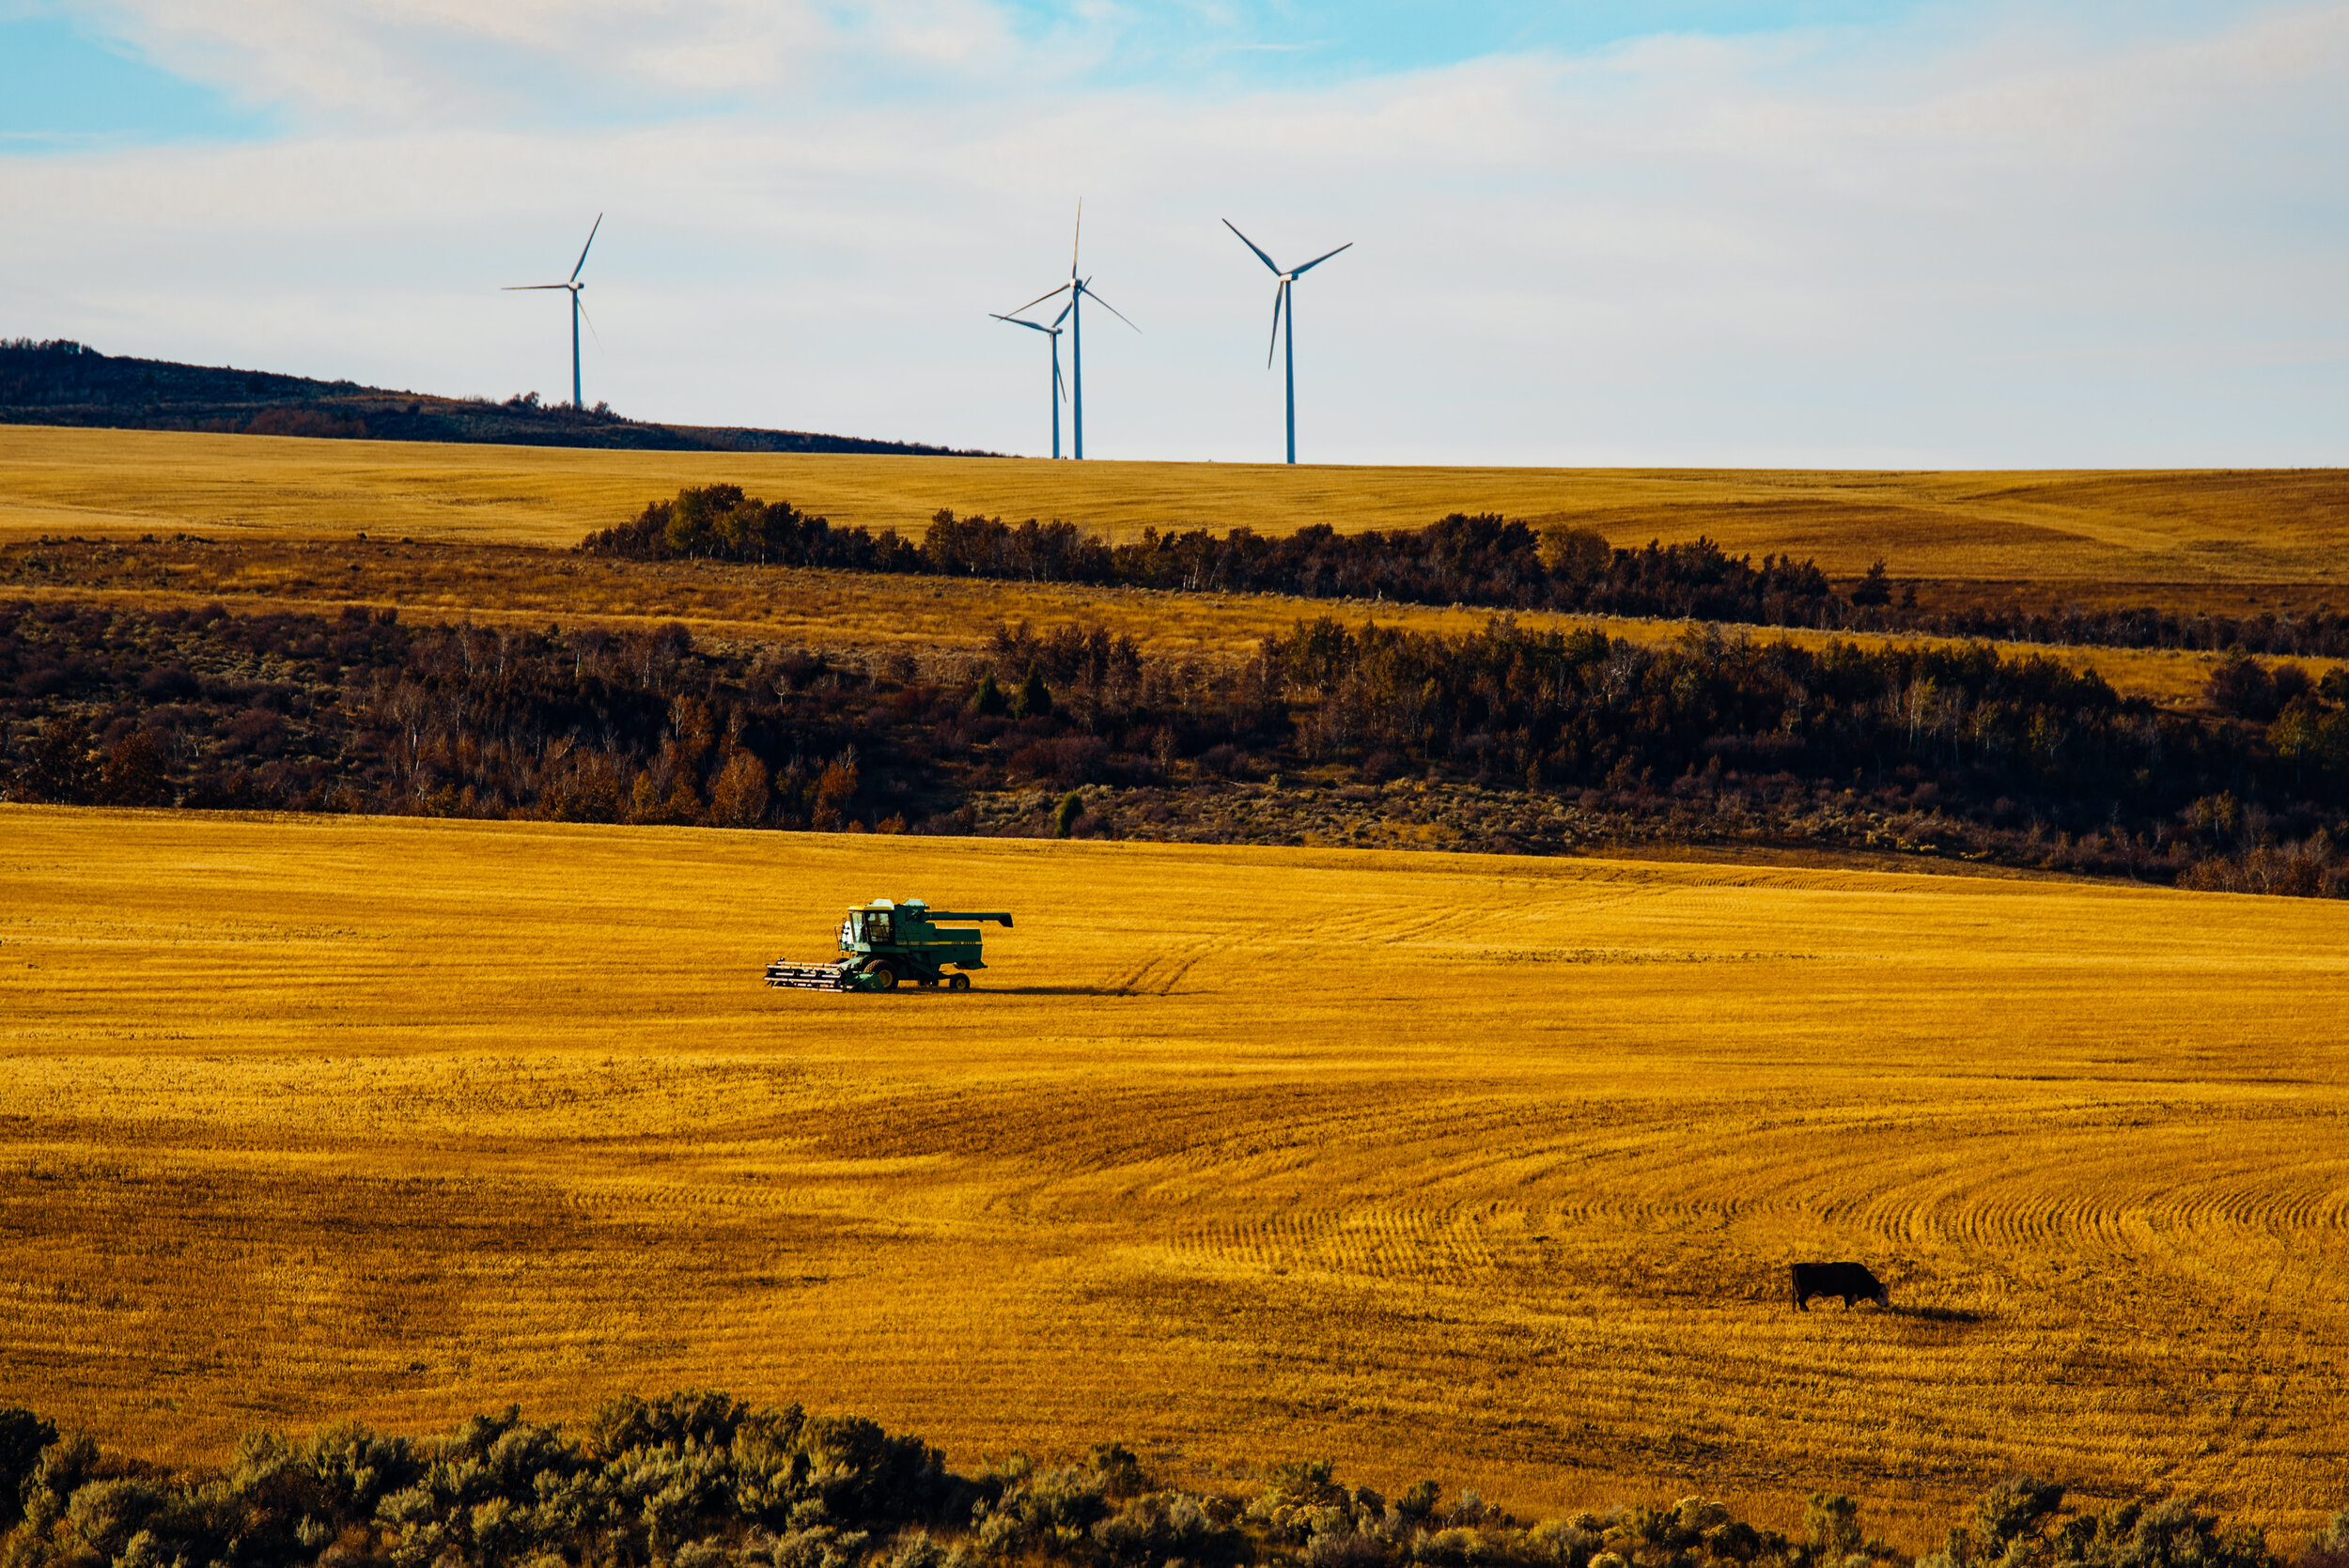 The quintessential southern Idaho in a photo. Tractors, cattle &amp; renewable energy.